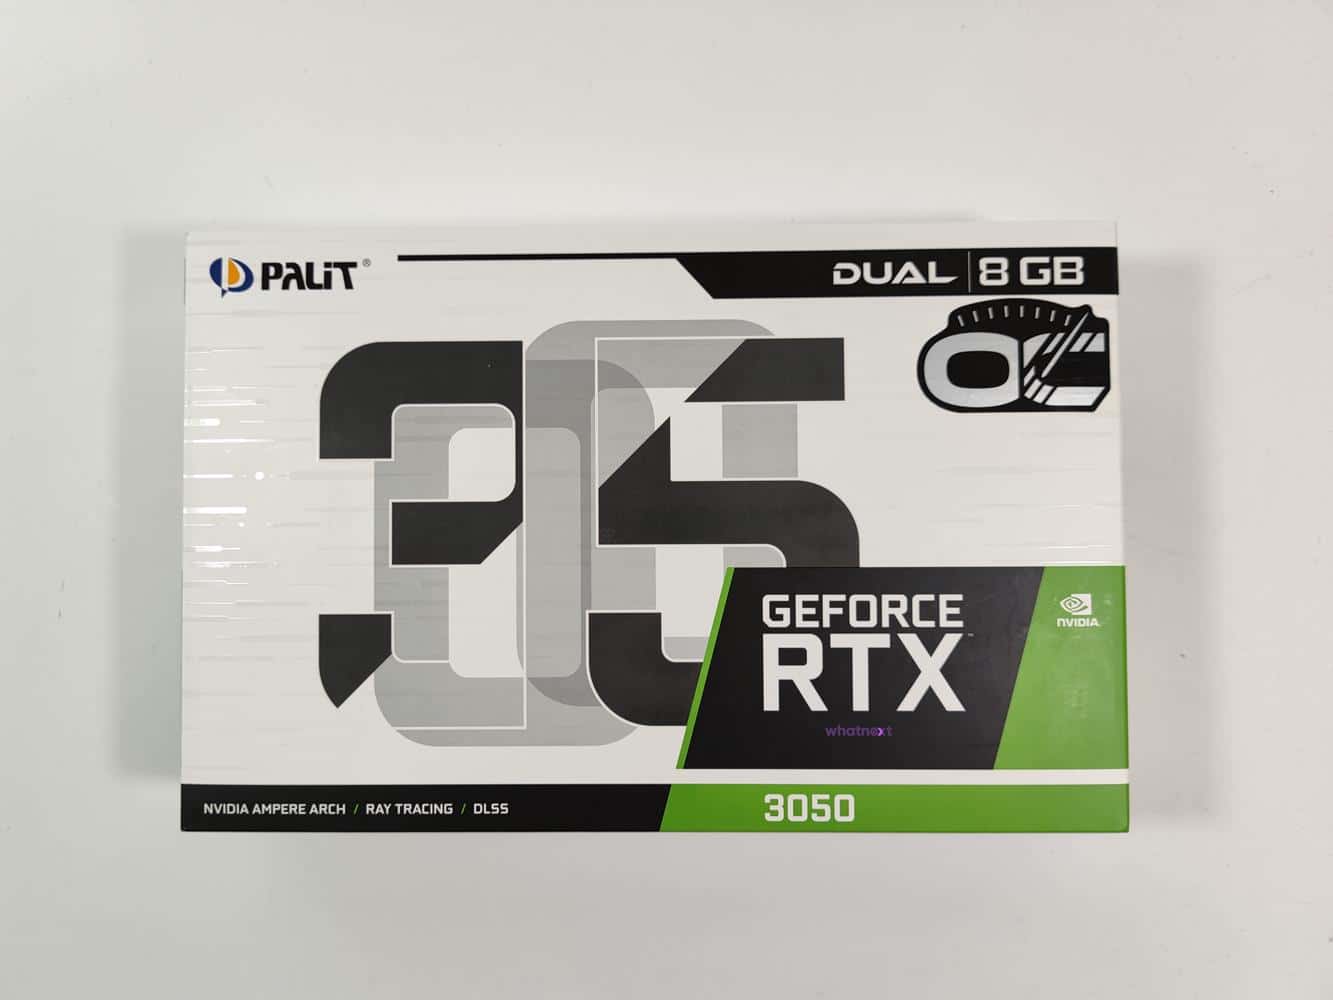 We know the prices of non-reference GeForce RTX 3050 cards